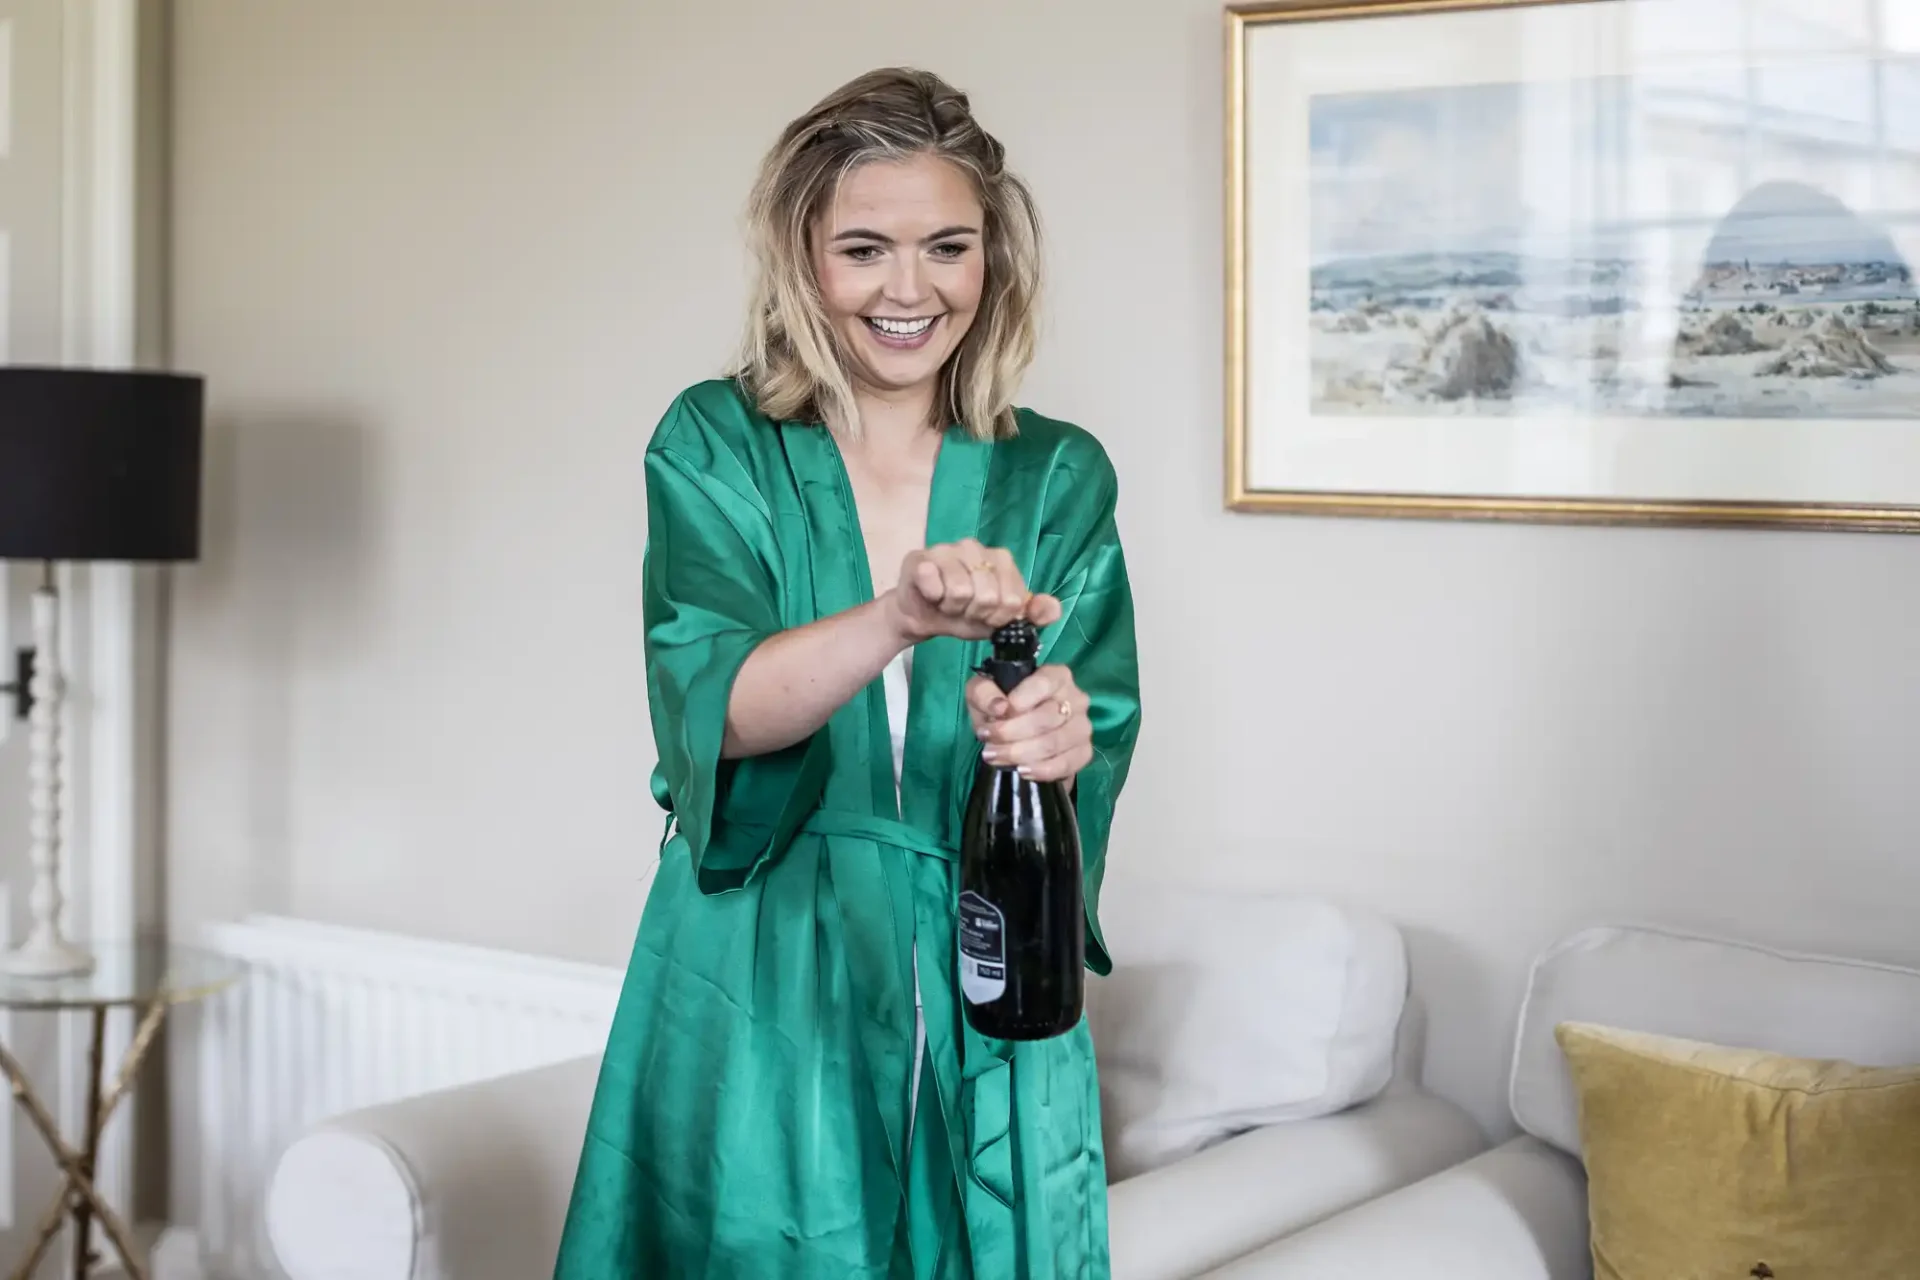 A woman in a green robe is smiling as she opens a bottle of champagne in a living room. A couch and a framed picture are in the background.